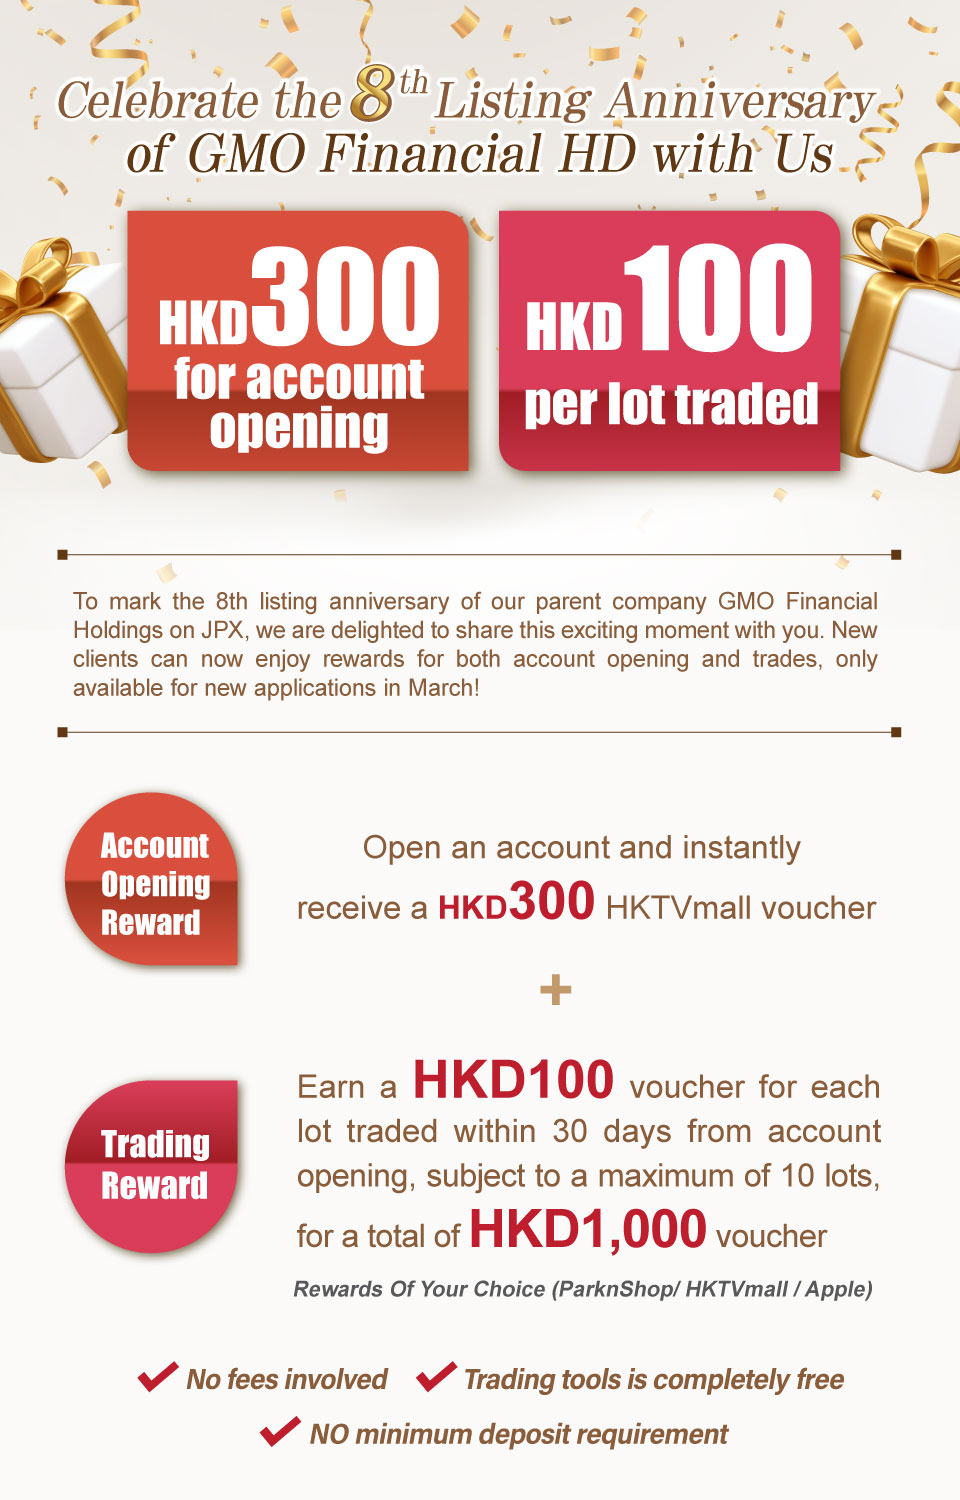 Celebrate the 8th Listing Anniversary of GMO Financial Holdings with Hefty Rewards | Earn HKD300 Account Opening Reward and an Extra HKD100 Per Lot Traded